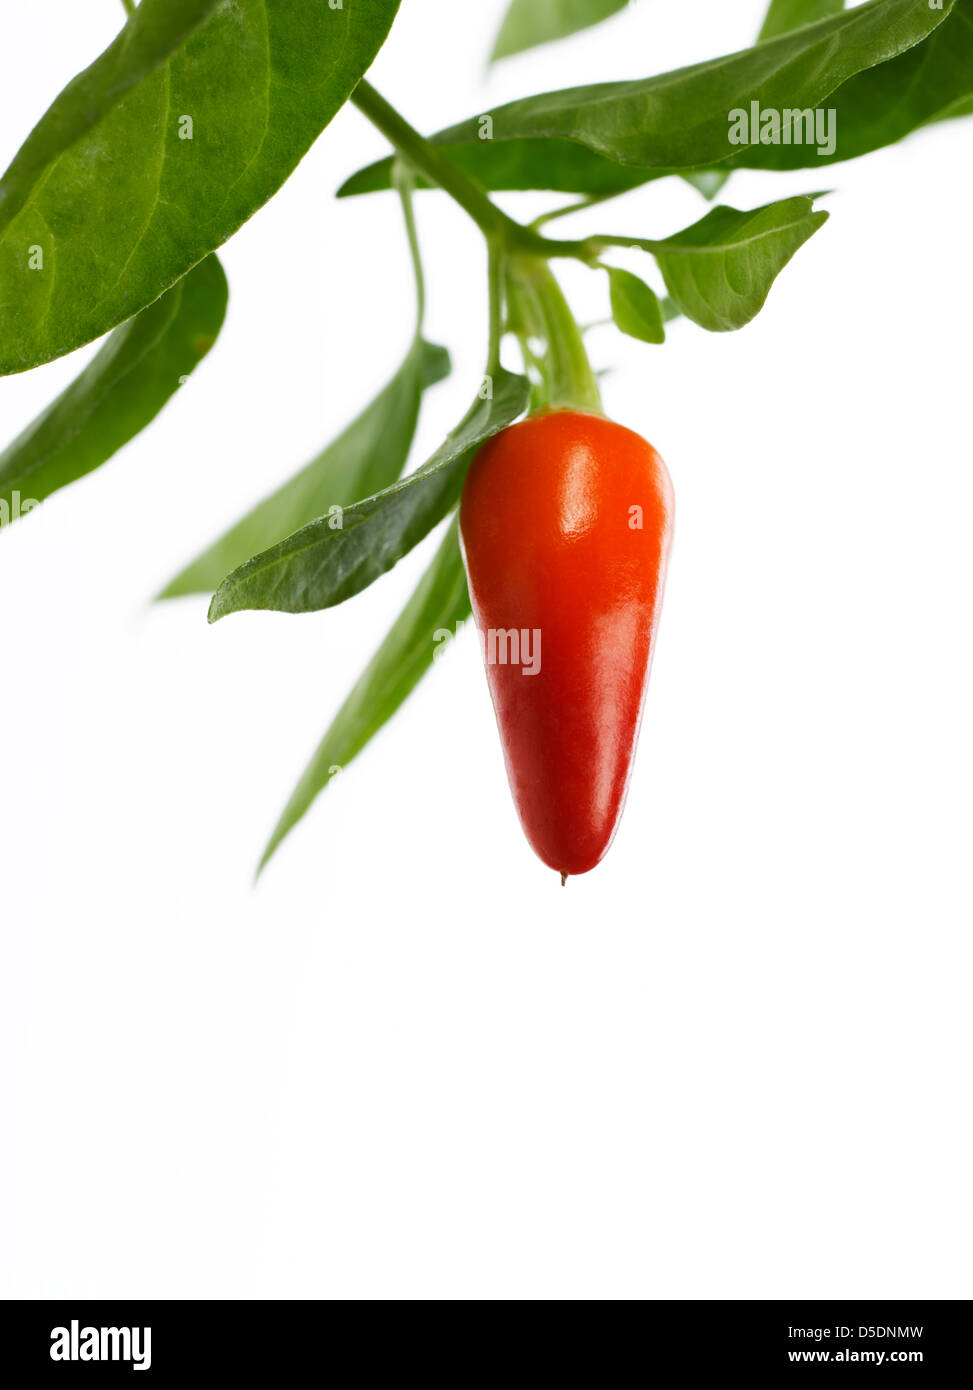 chili pepper growing on stem Stock Photo